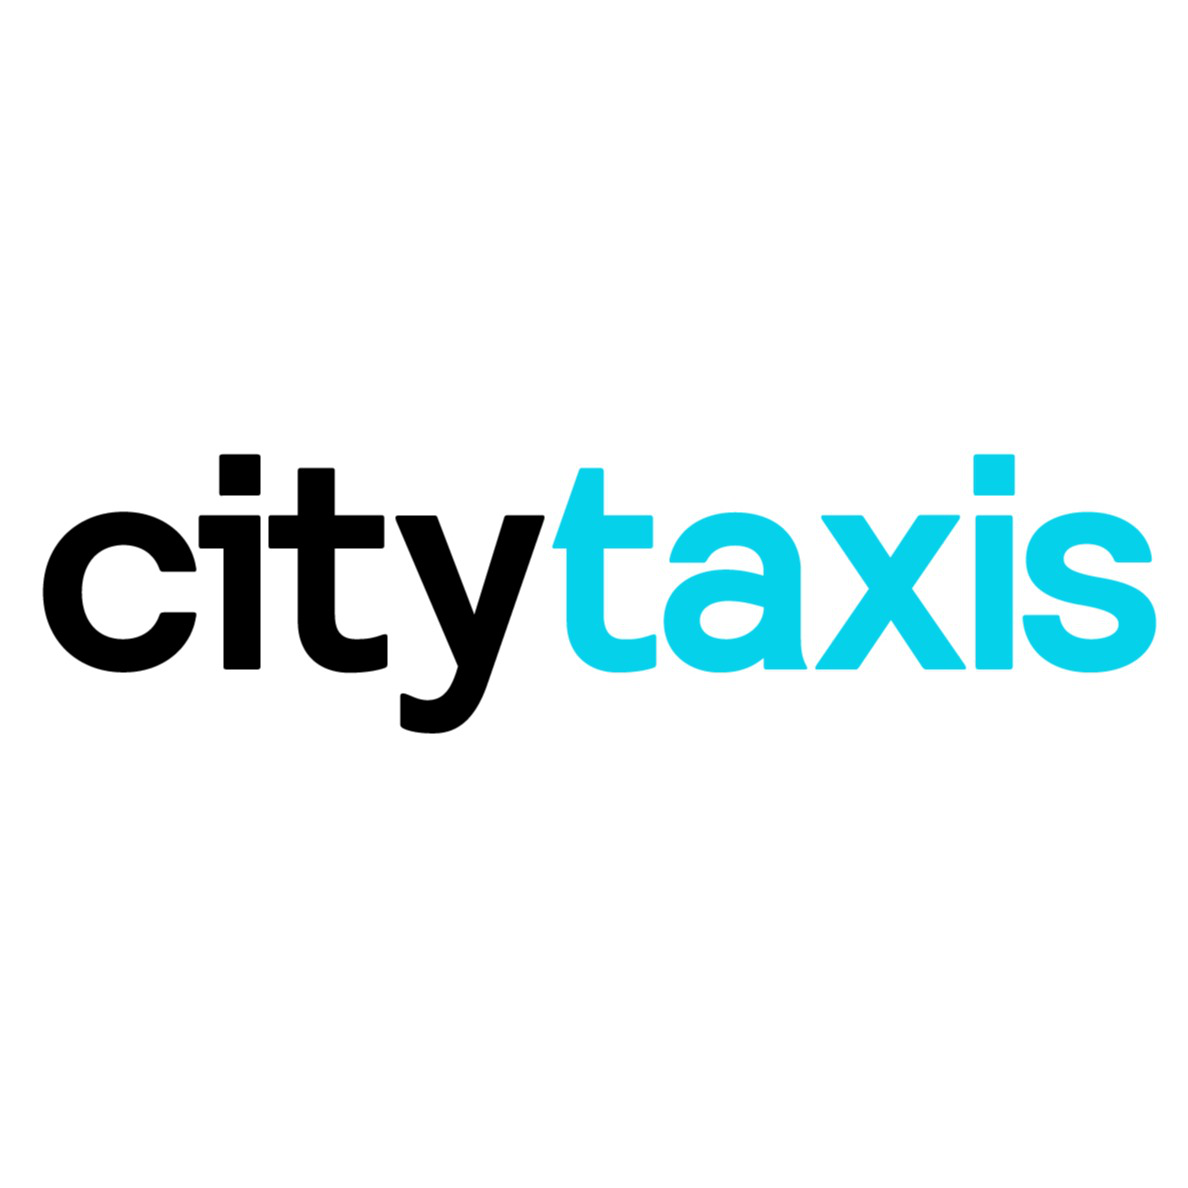 City Taxis Business, Sales and Marketing Academy